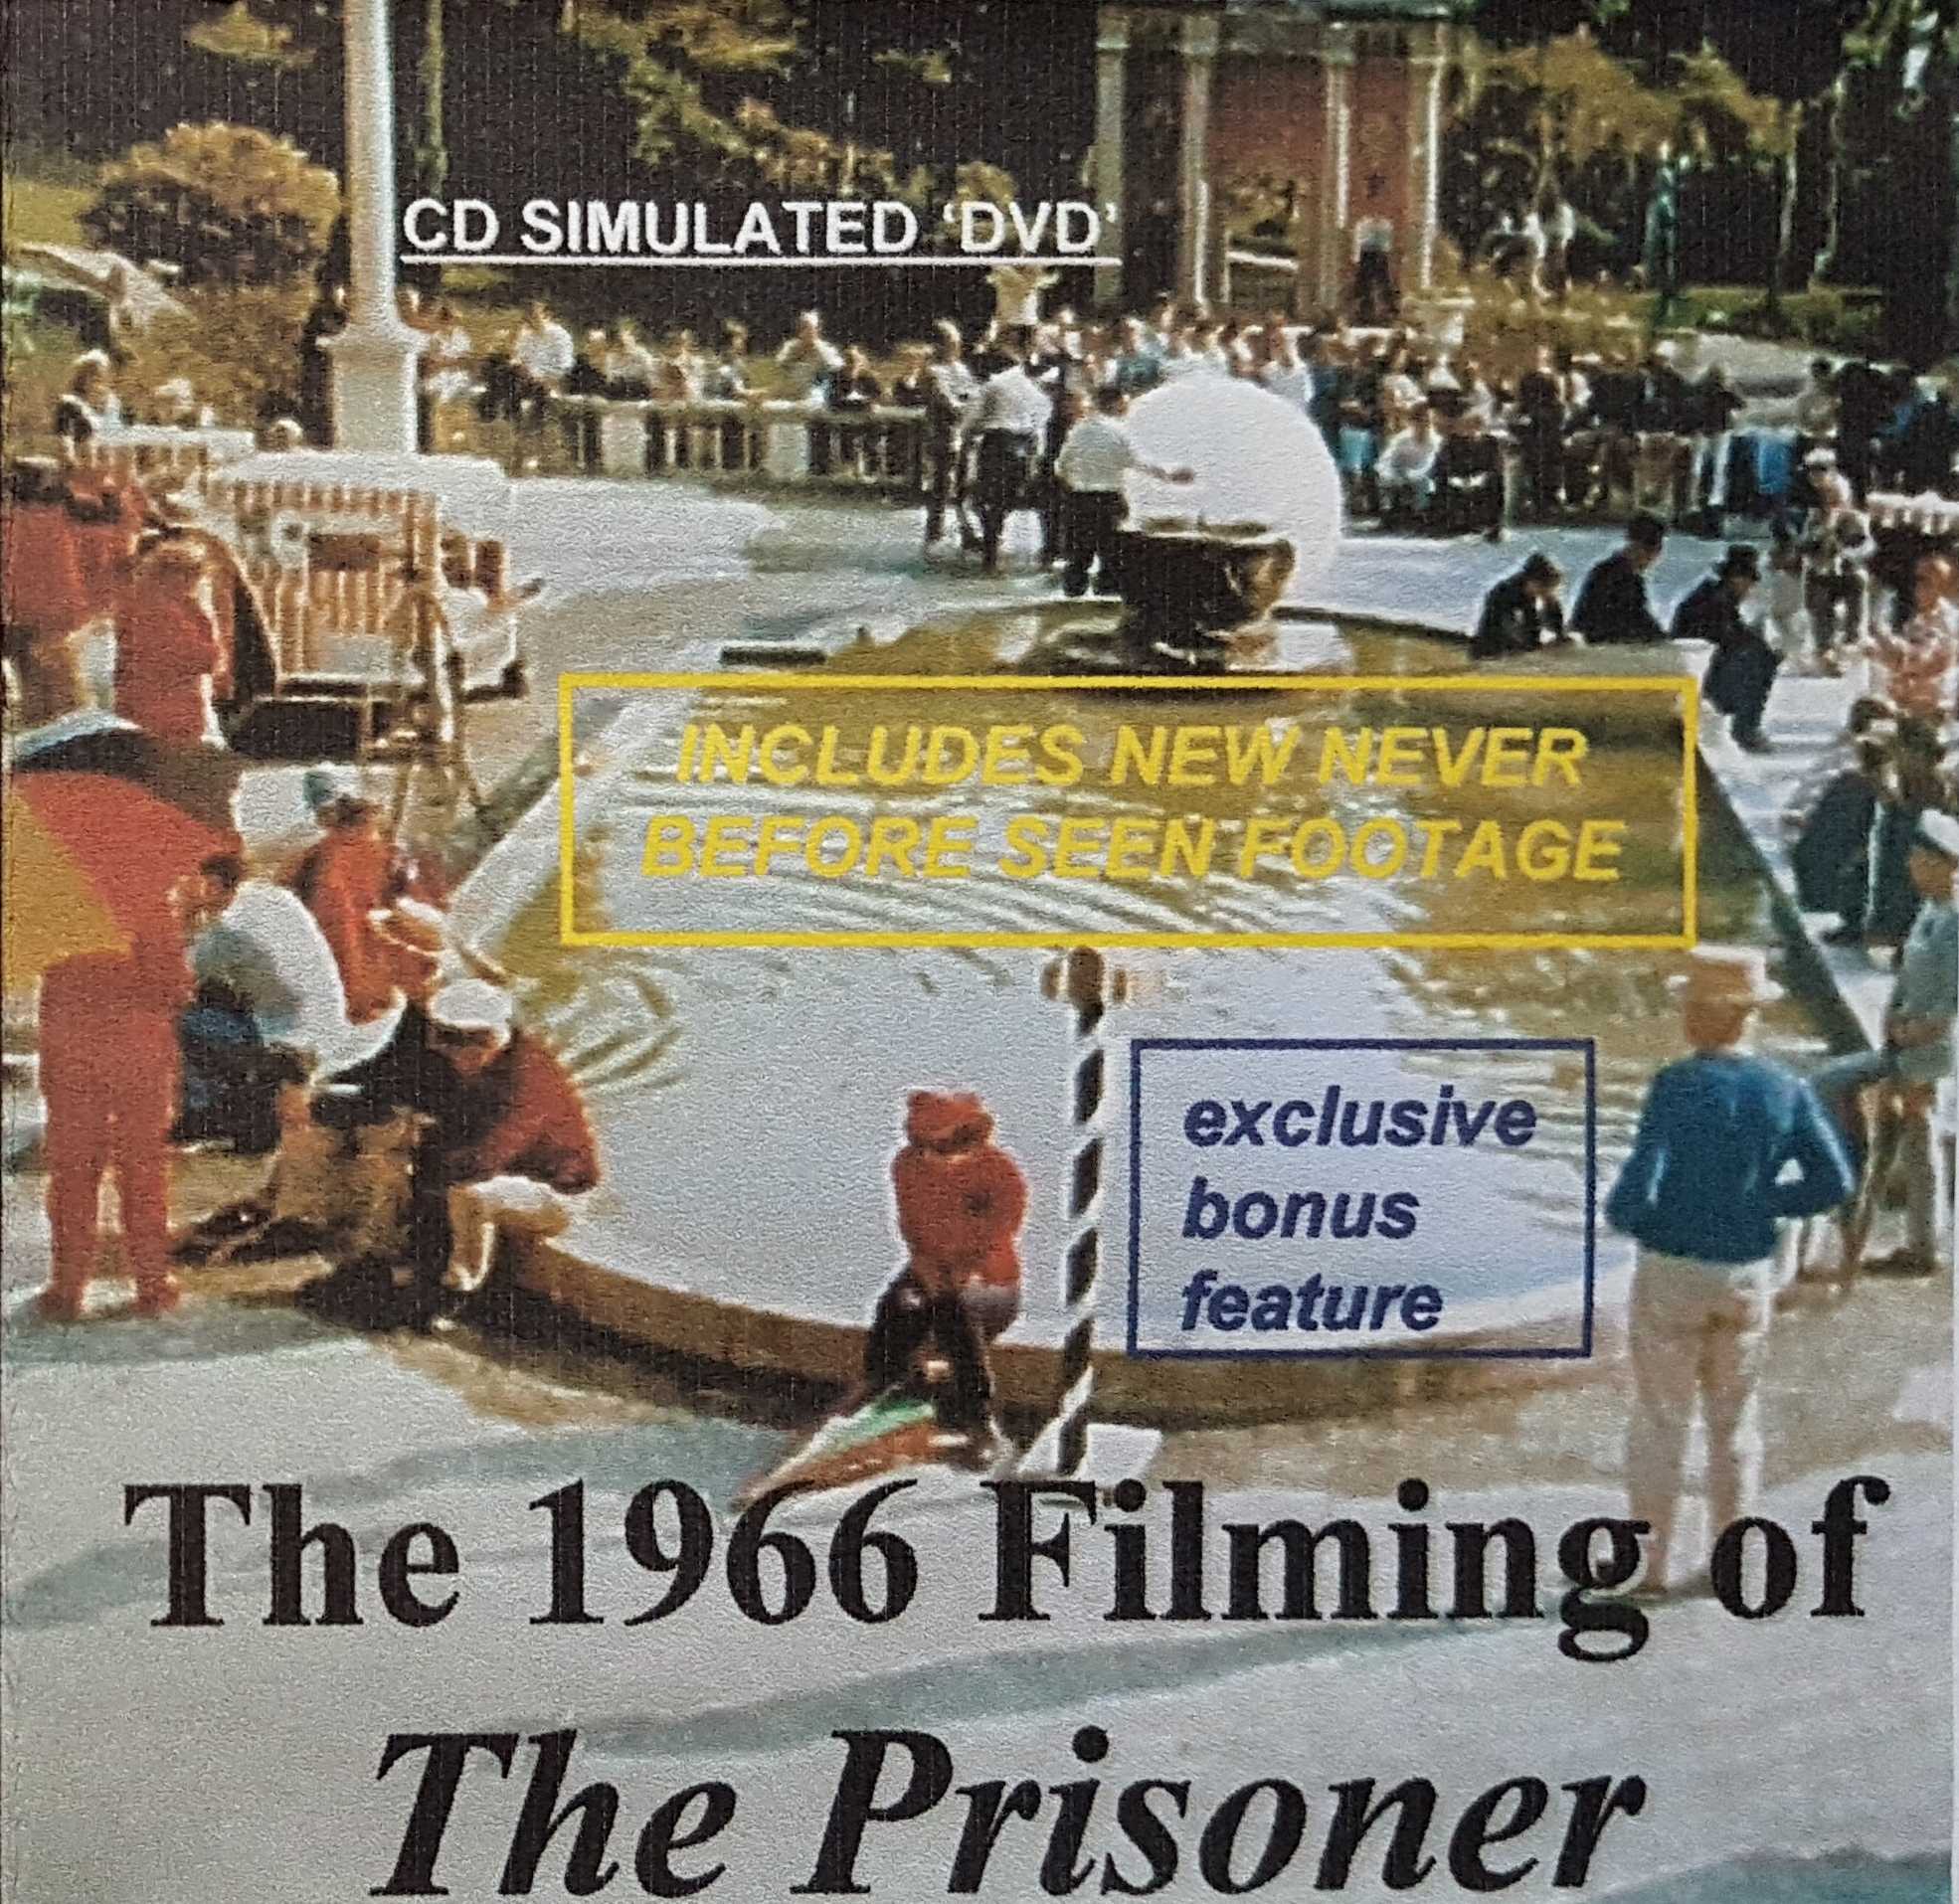 Picture of DVD-T1FOTP The 1966 filming of the Prisoner by artist Unknown from ITV, Channel 4 and Channel 5 dvds library